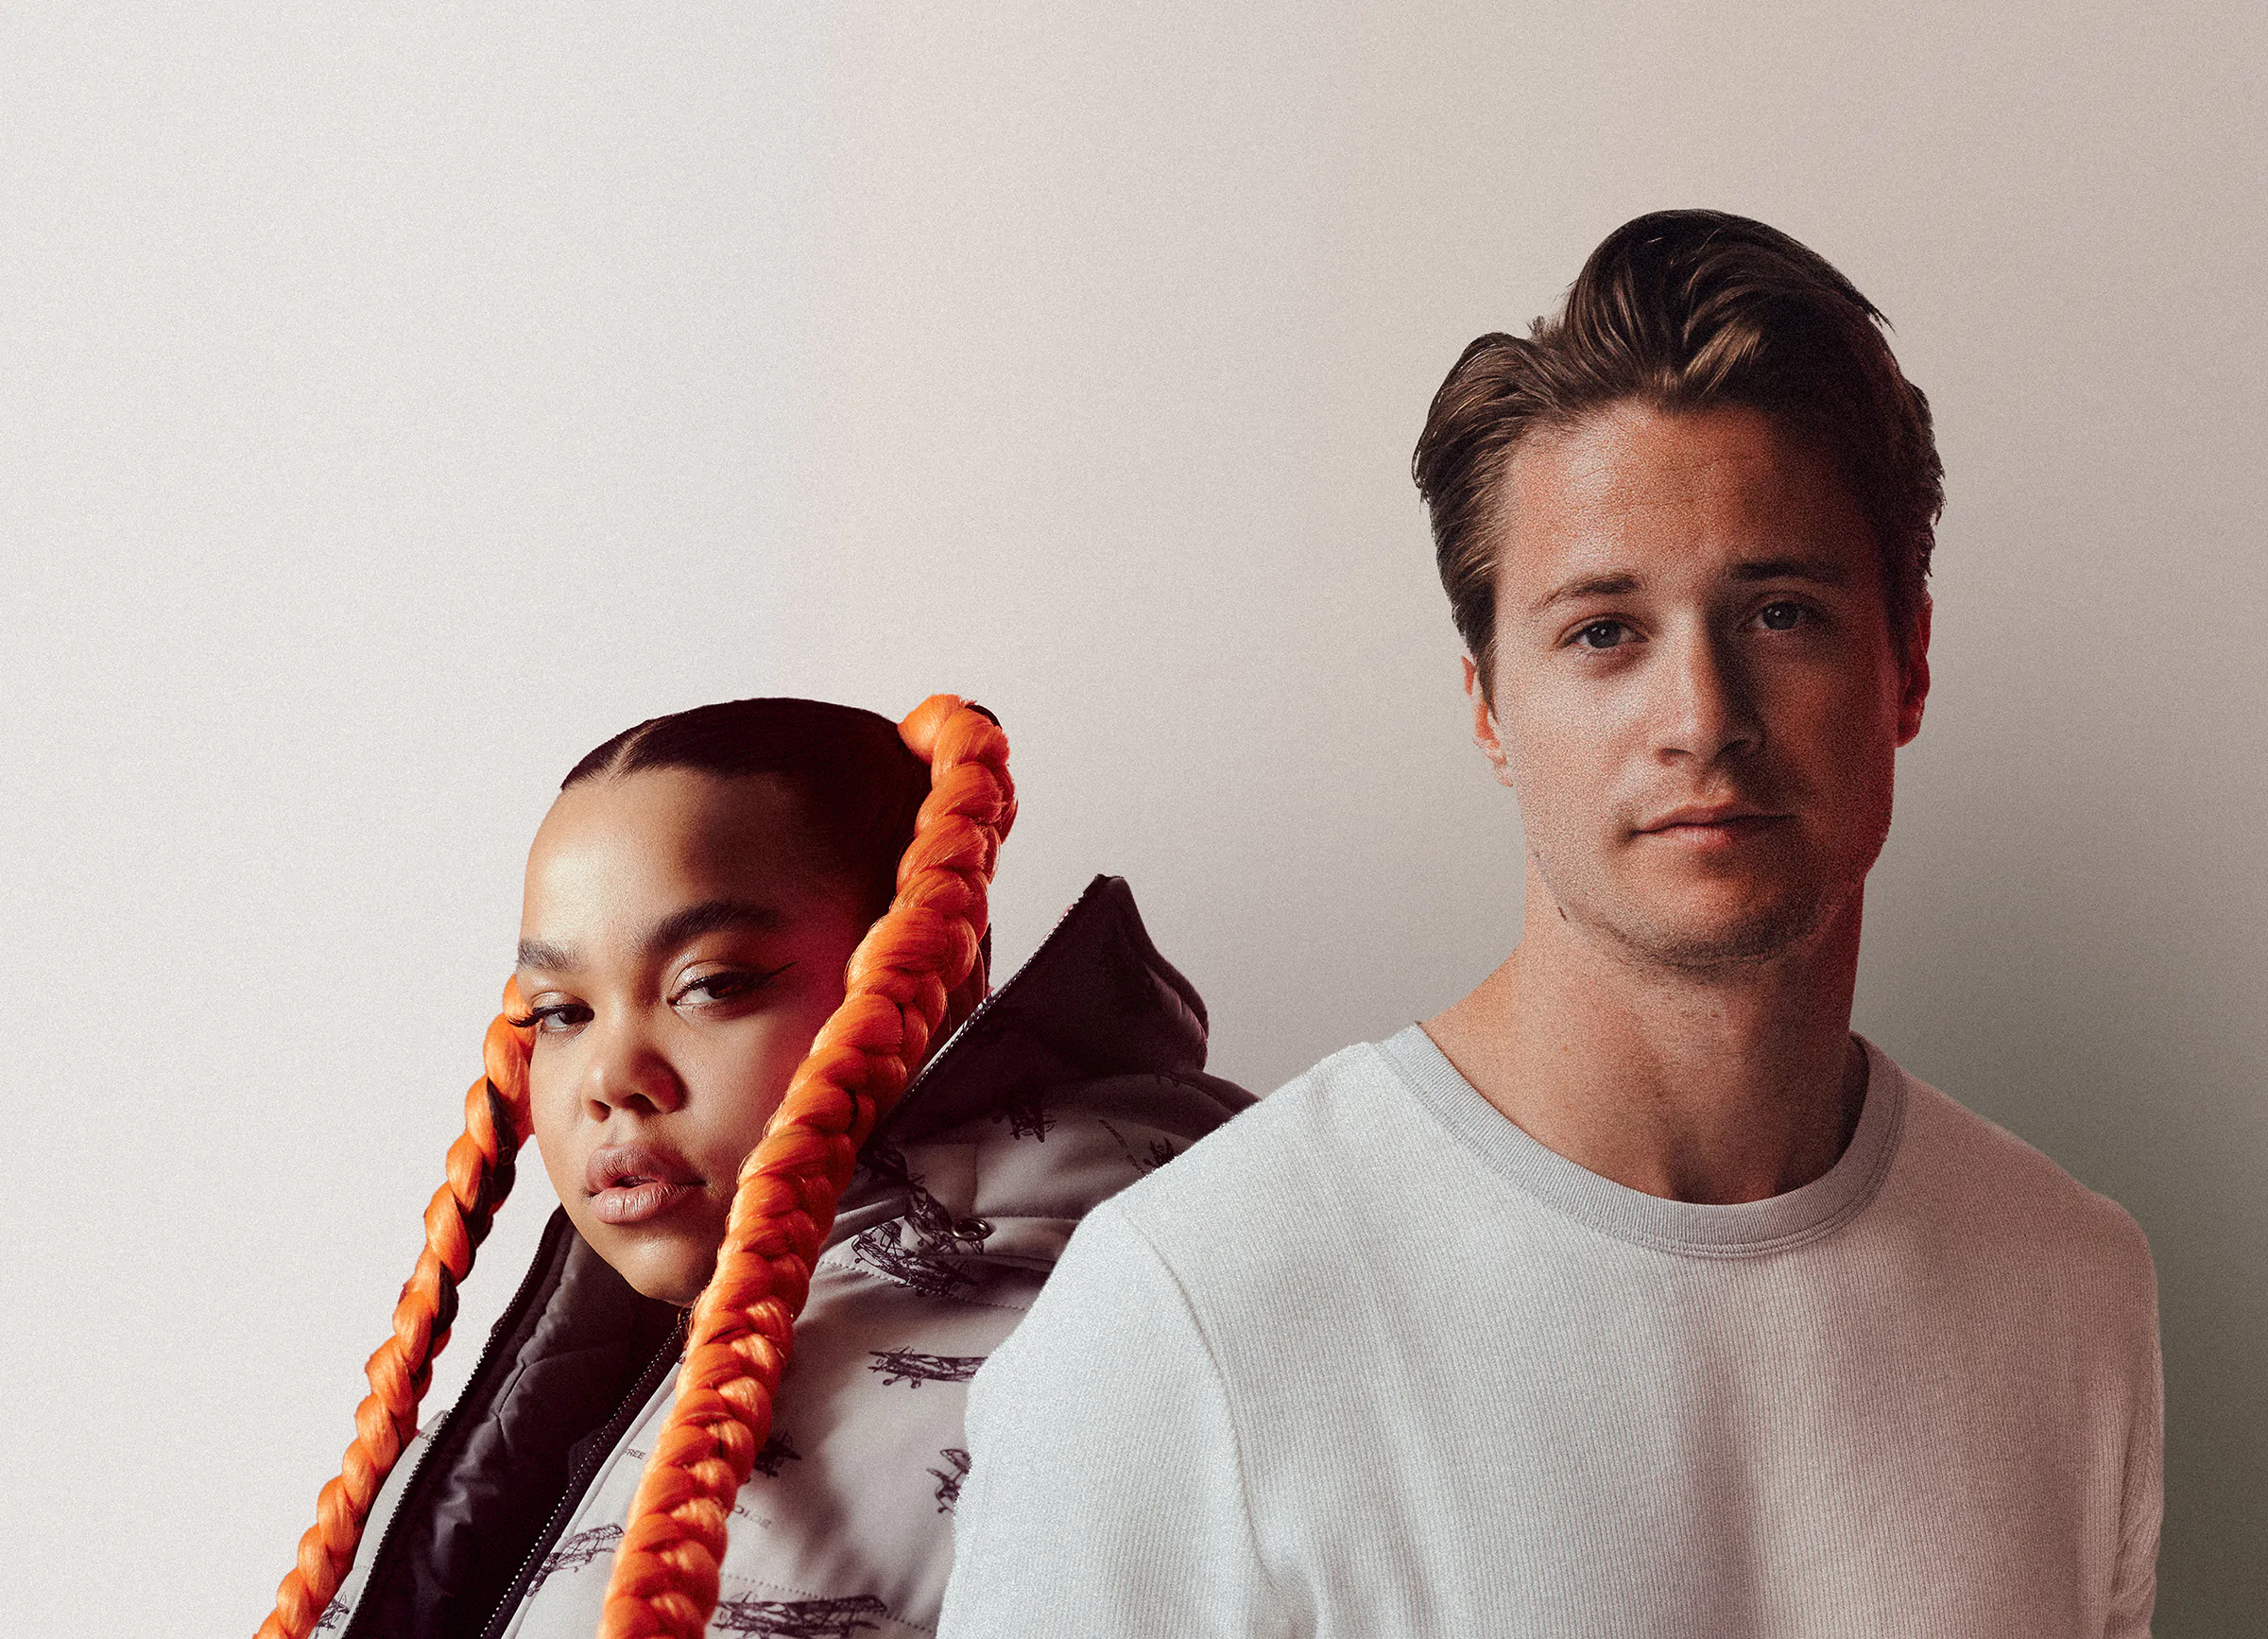 Global superstar, producer and DJ, KYGO releases his new song ‘Love Me Now’ ft. Zoe Wees